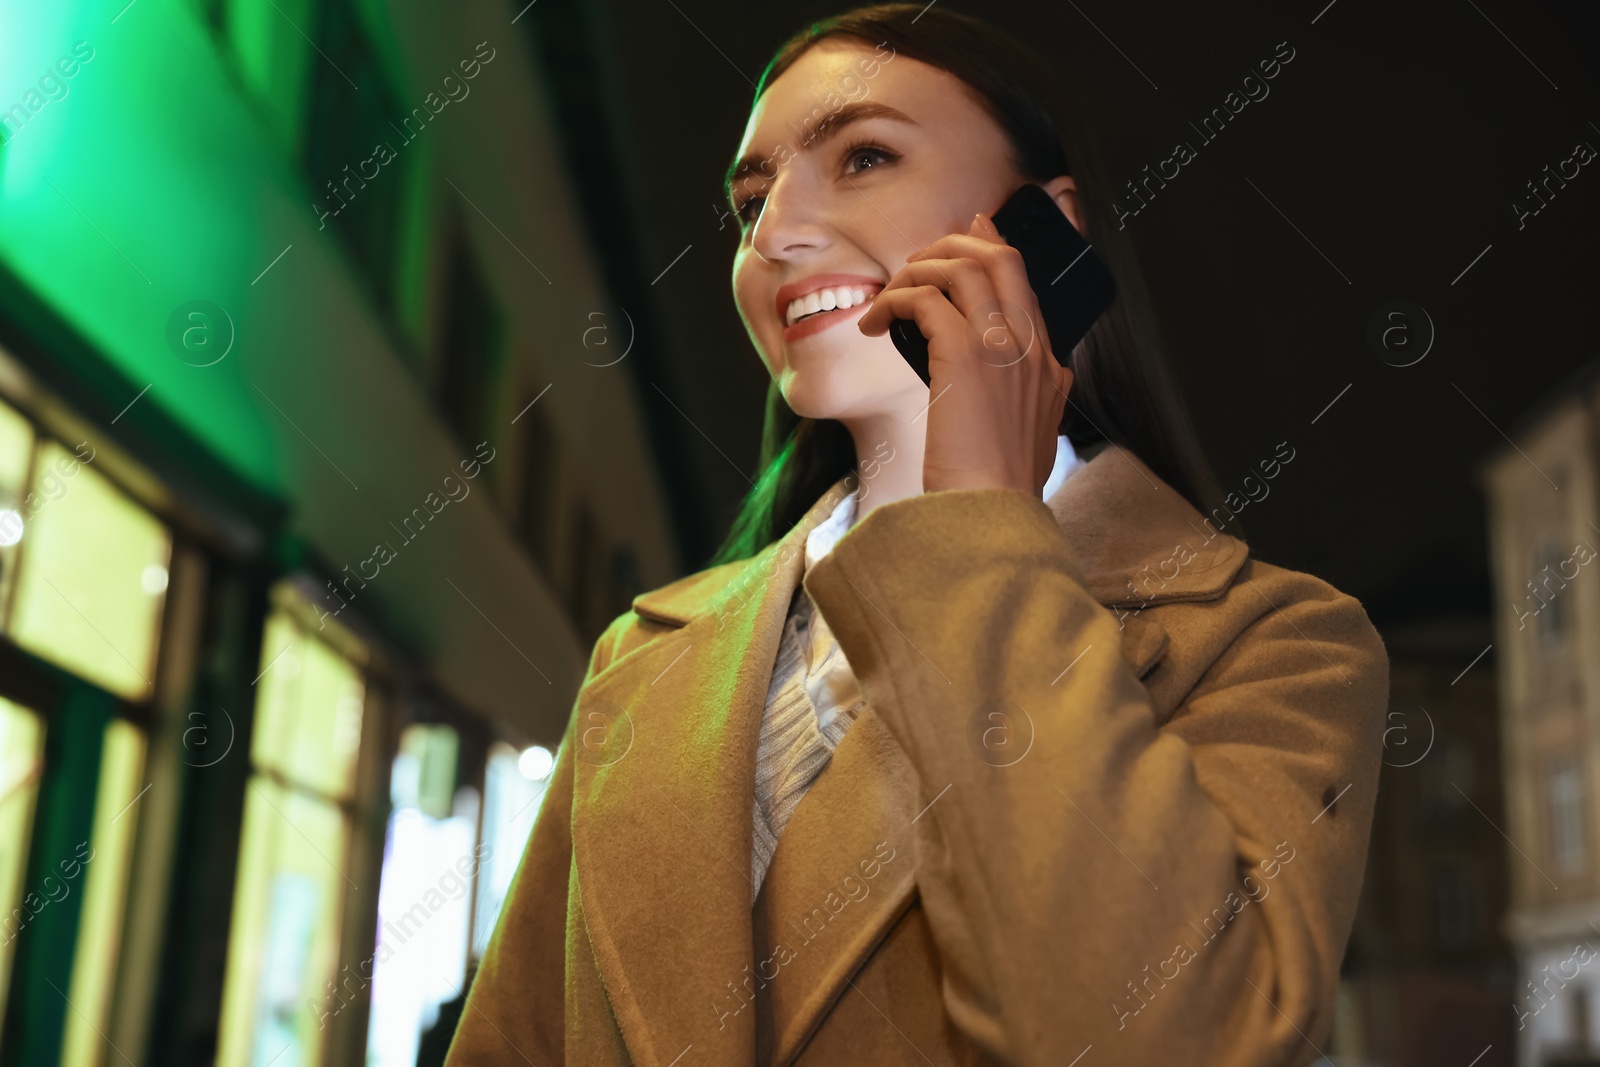 Photo of Smiling woman talking by smartphone on night city street